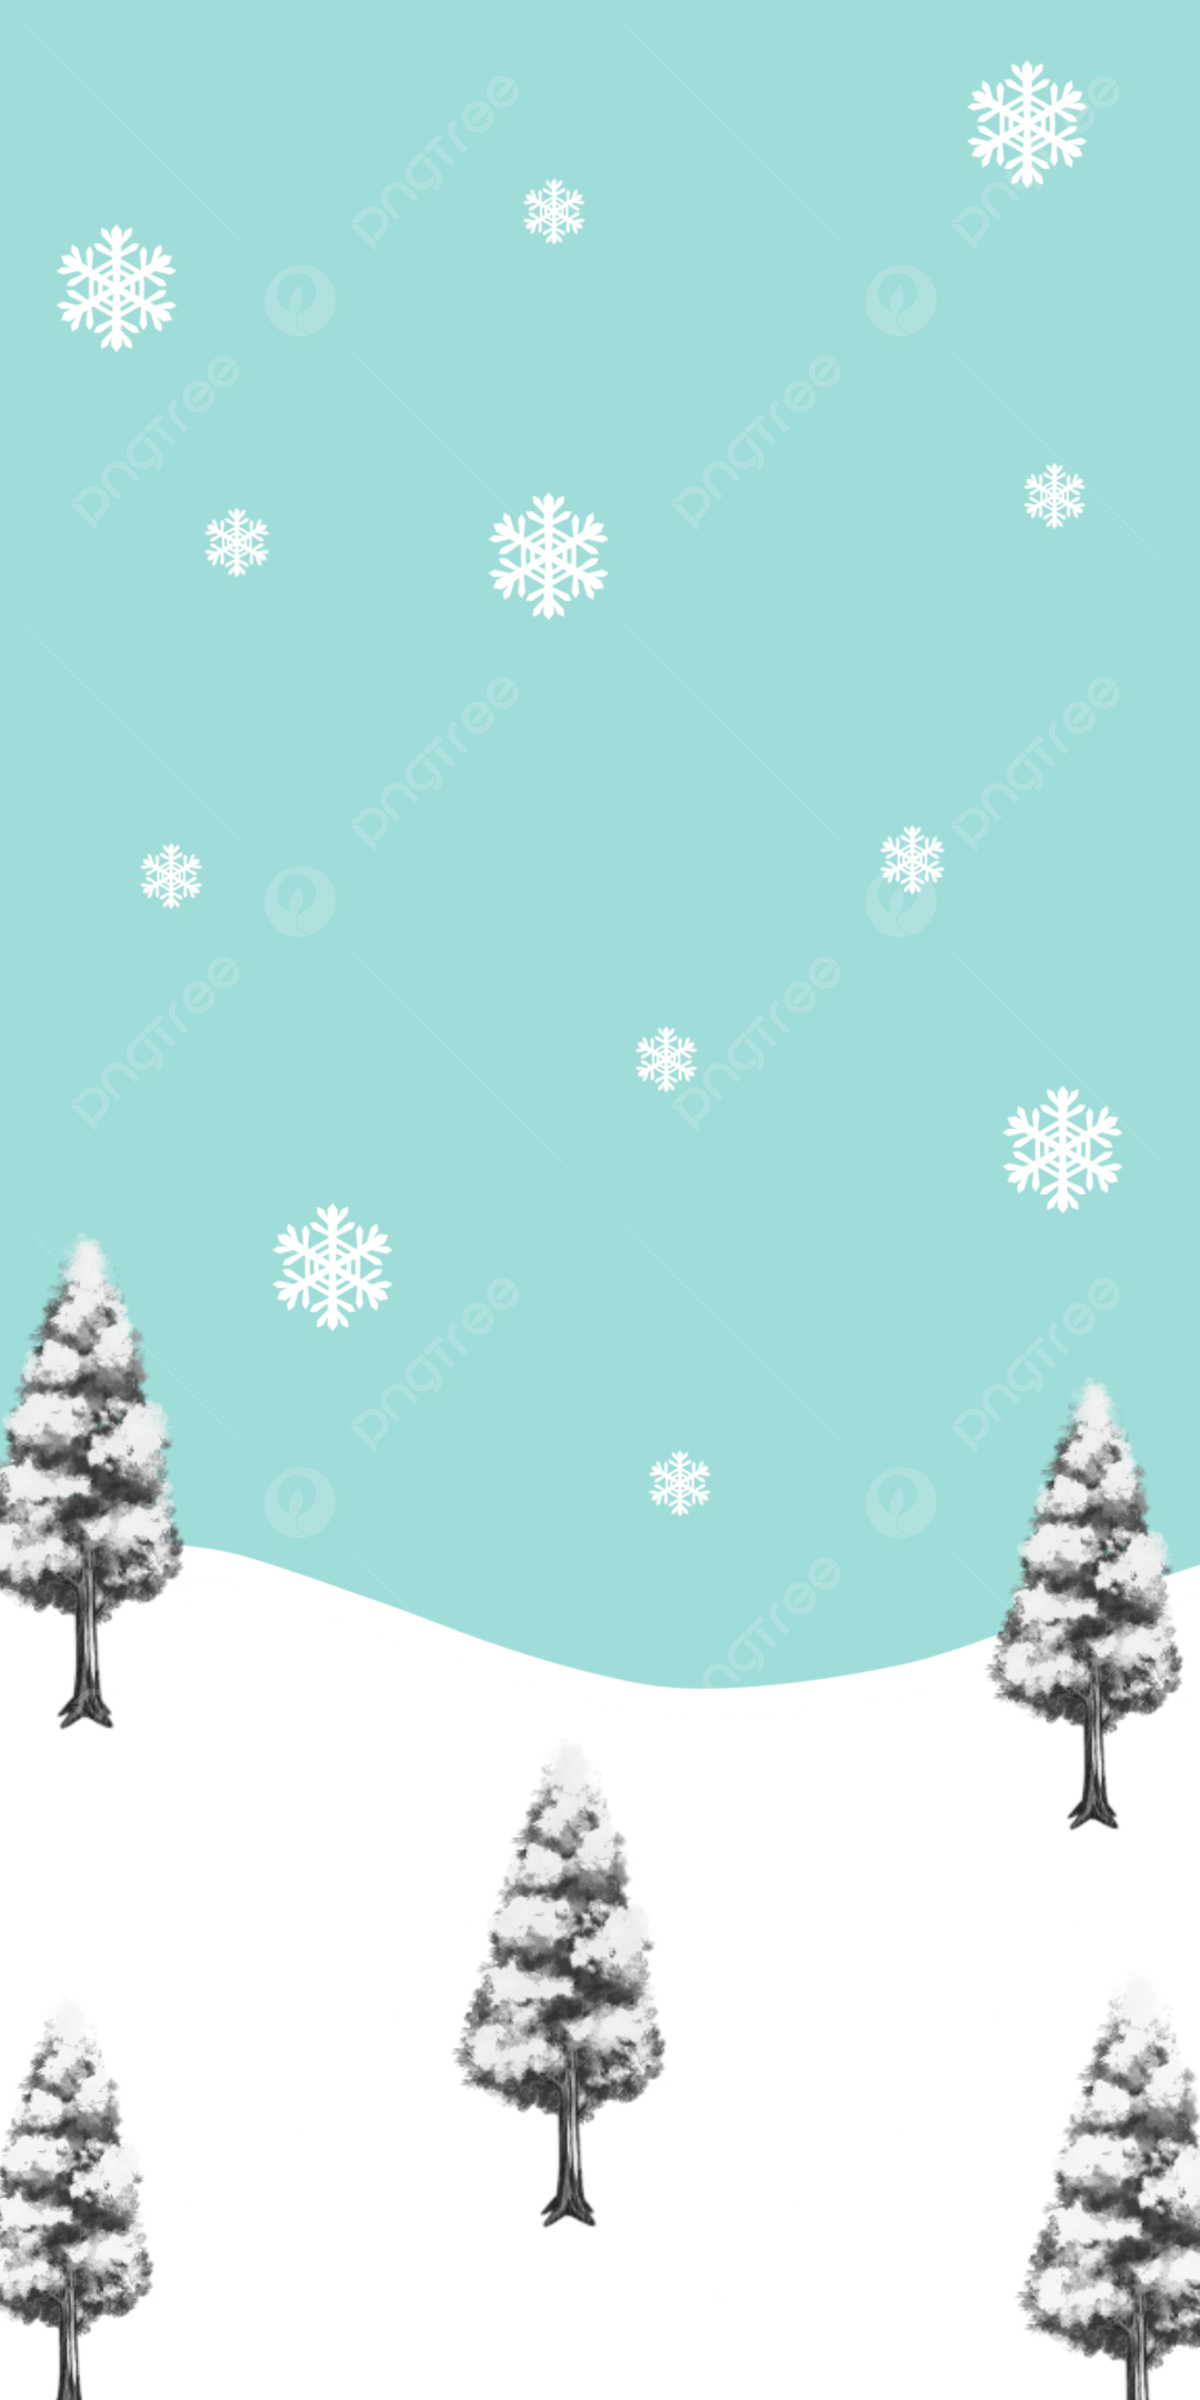 Snow Fall Winter Wallpaper Background, Snow, Snow Fall, Snow Flake Background Image for Free Download